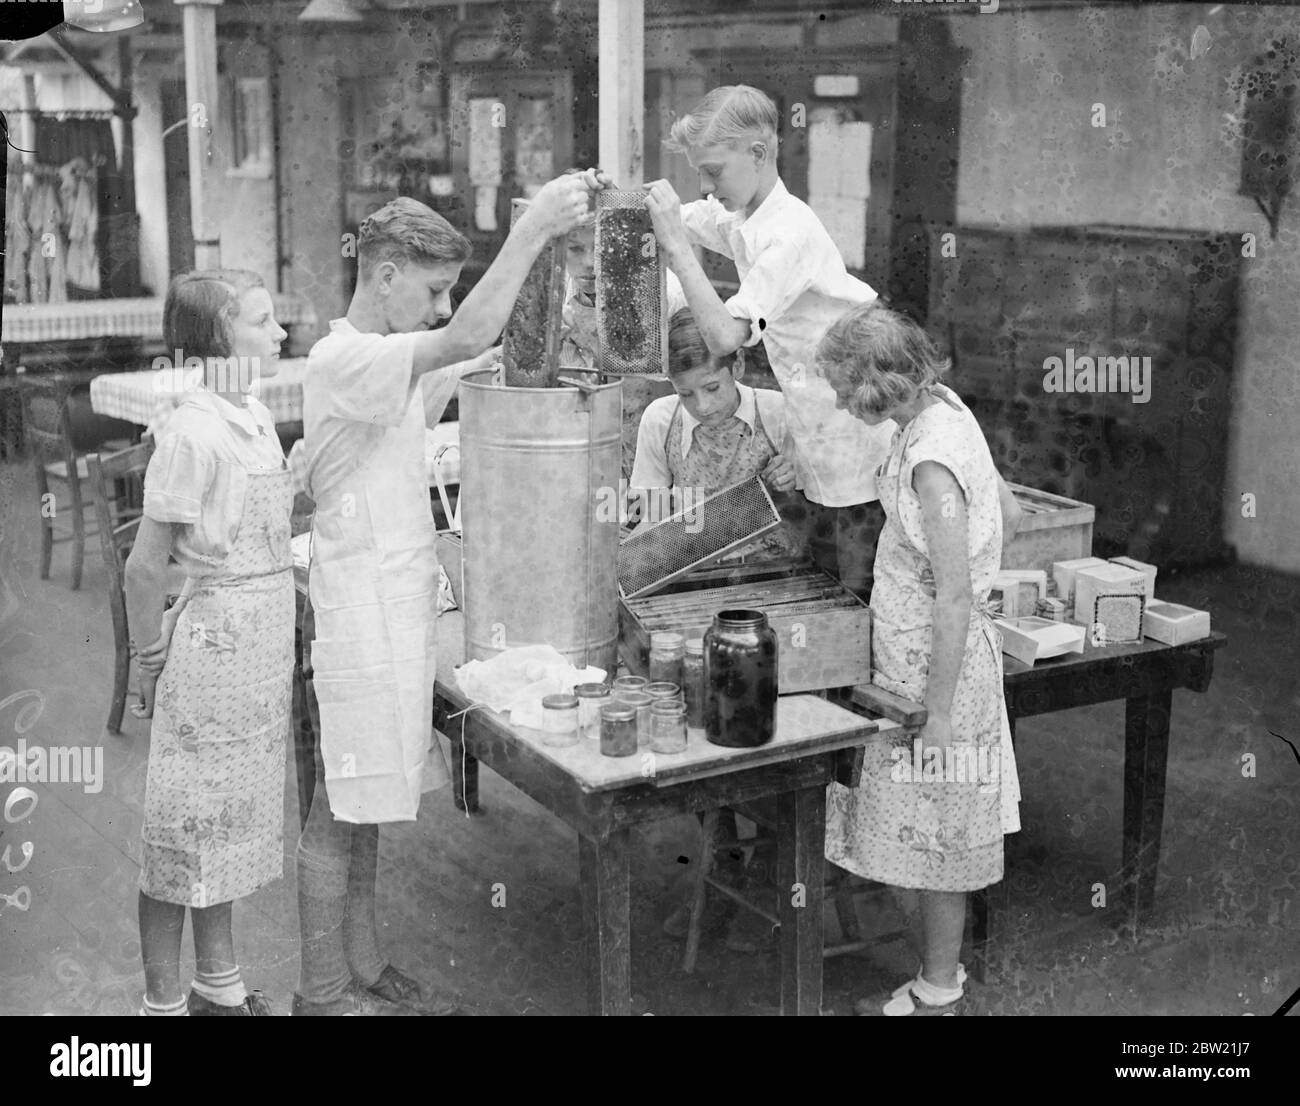 A pupil scraping the wax cap from the comb before it is placed in turn where the honey is removed by centrifugal force. Beekeeping is now included in the curriculum of the wood Lane School in Shepherd's Bush, London. The pupils are given complete instruction in the art from gathering the nectar to the final process of bottling the honey. 5 September 1937. Stock Photo